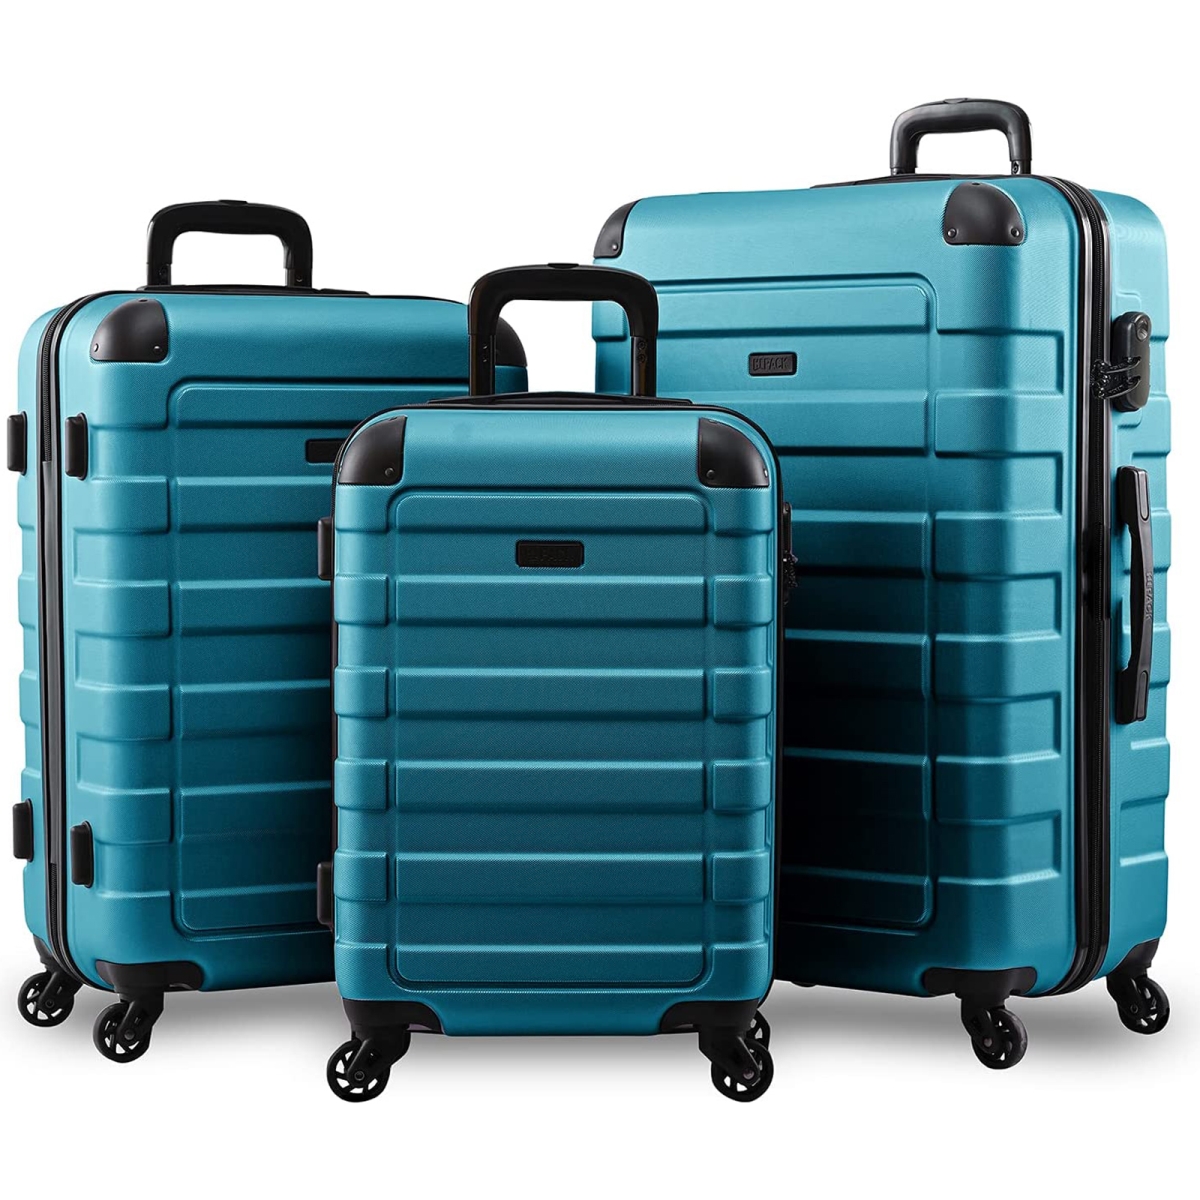 Picture of Hipack 25HP1903-TURQUOISE Hipack Prime Hardside 3-Piece Spinner Luggage Set - Turquoise